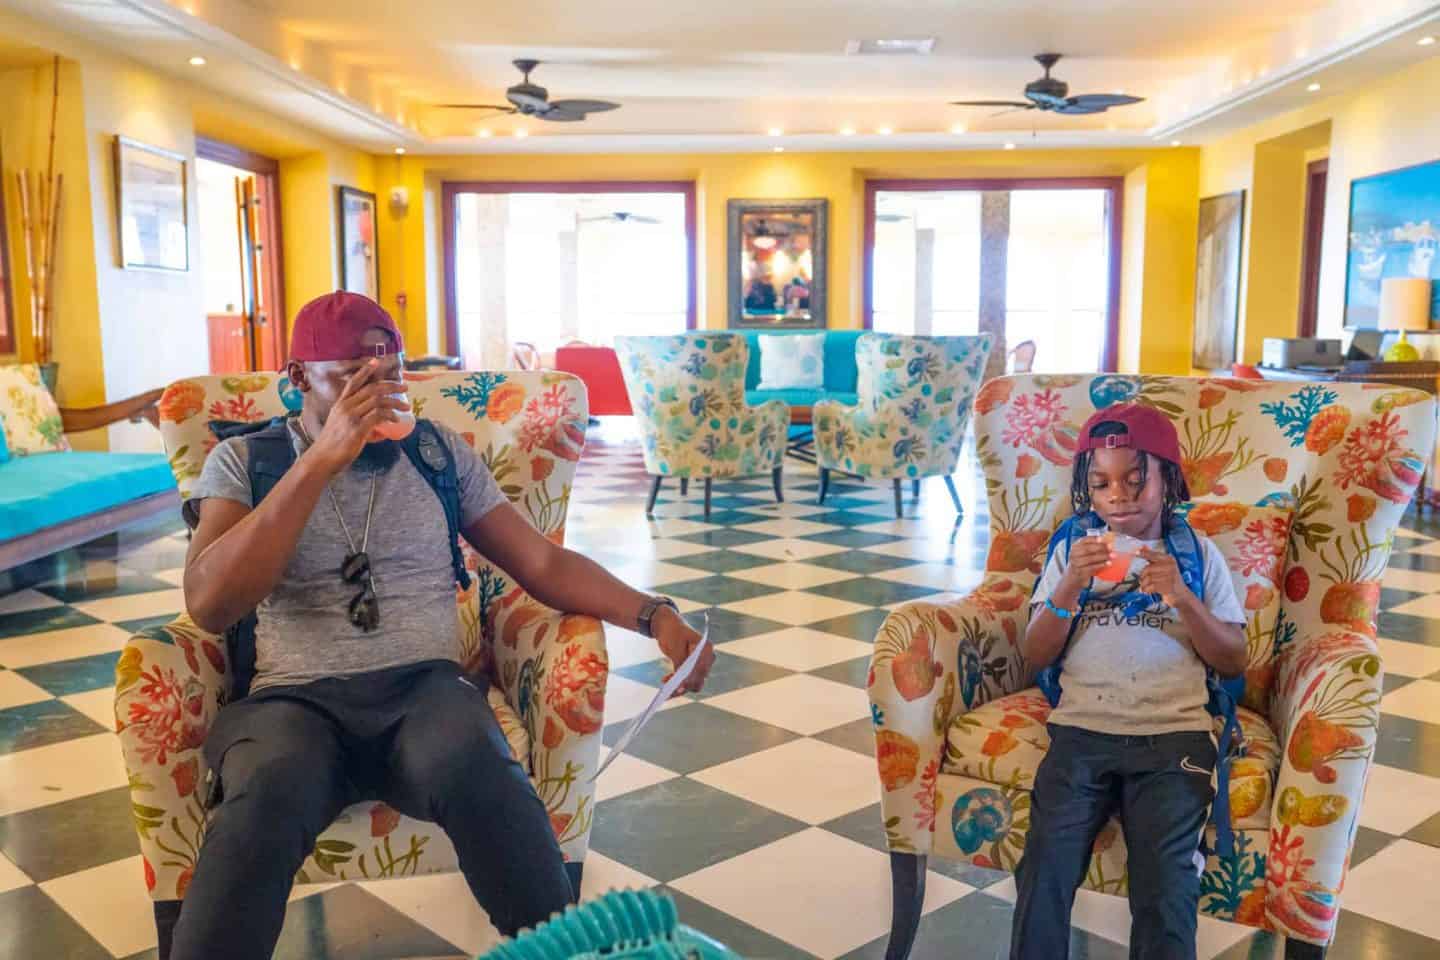 Black Family Travel Things To Do In St Croix Black Family Travel Black Travelers Black Kids Travel Black Family Traveling The World Black Worldschoolers African American Family 253